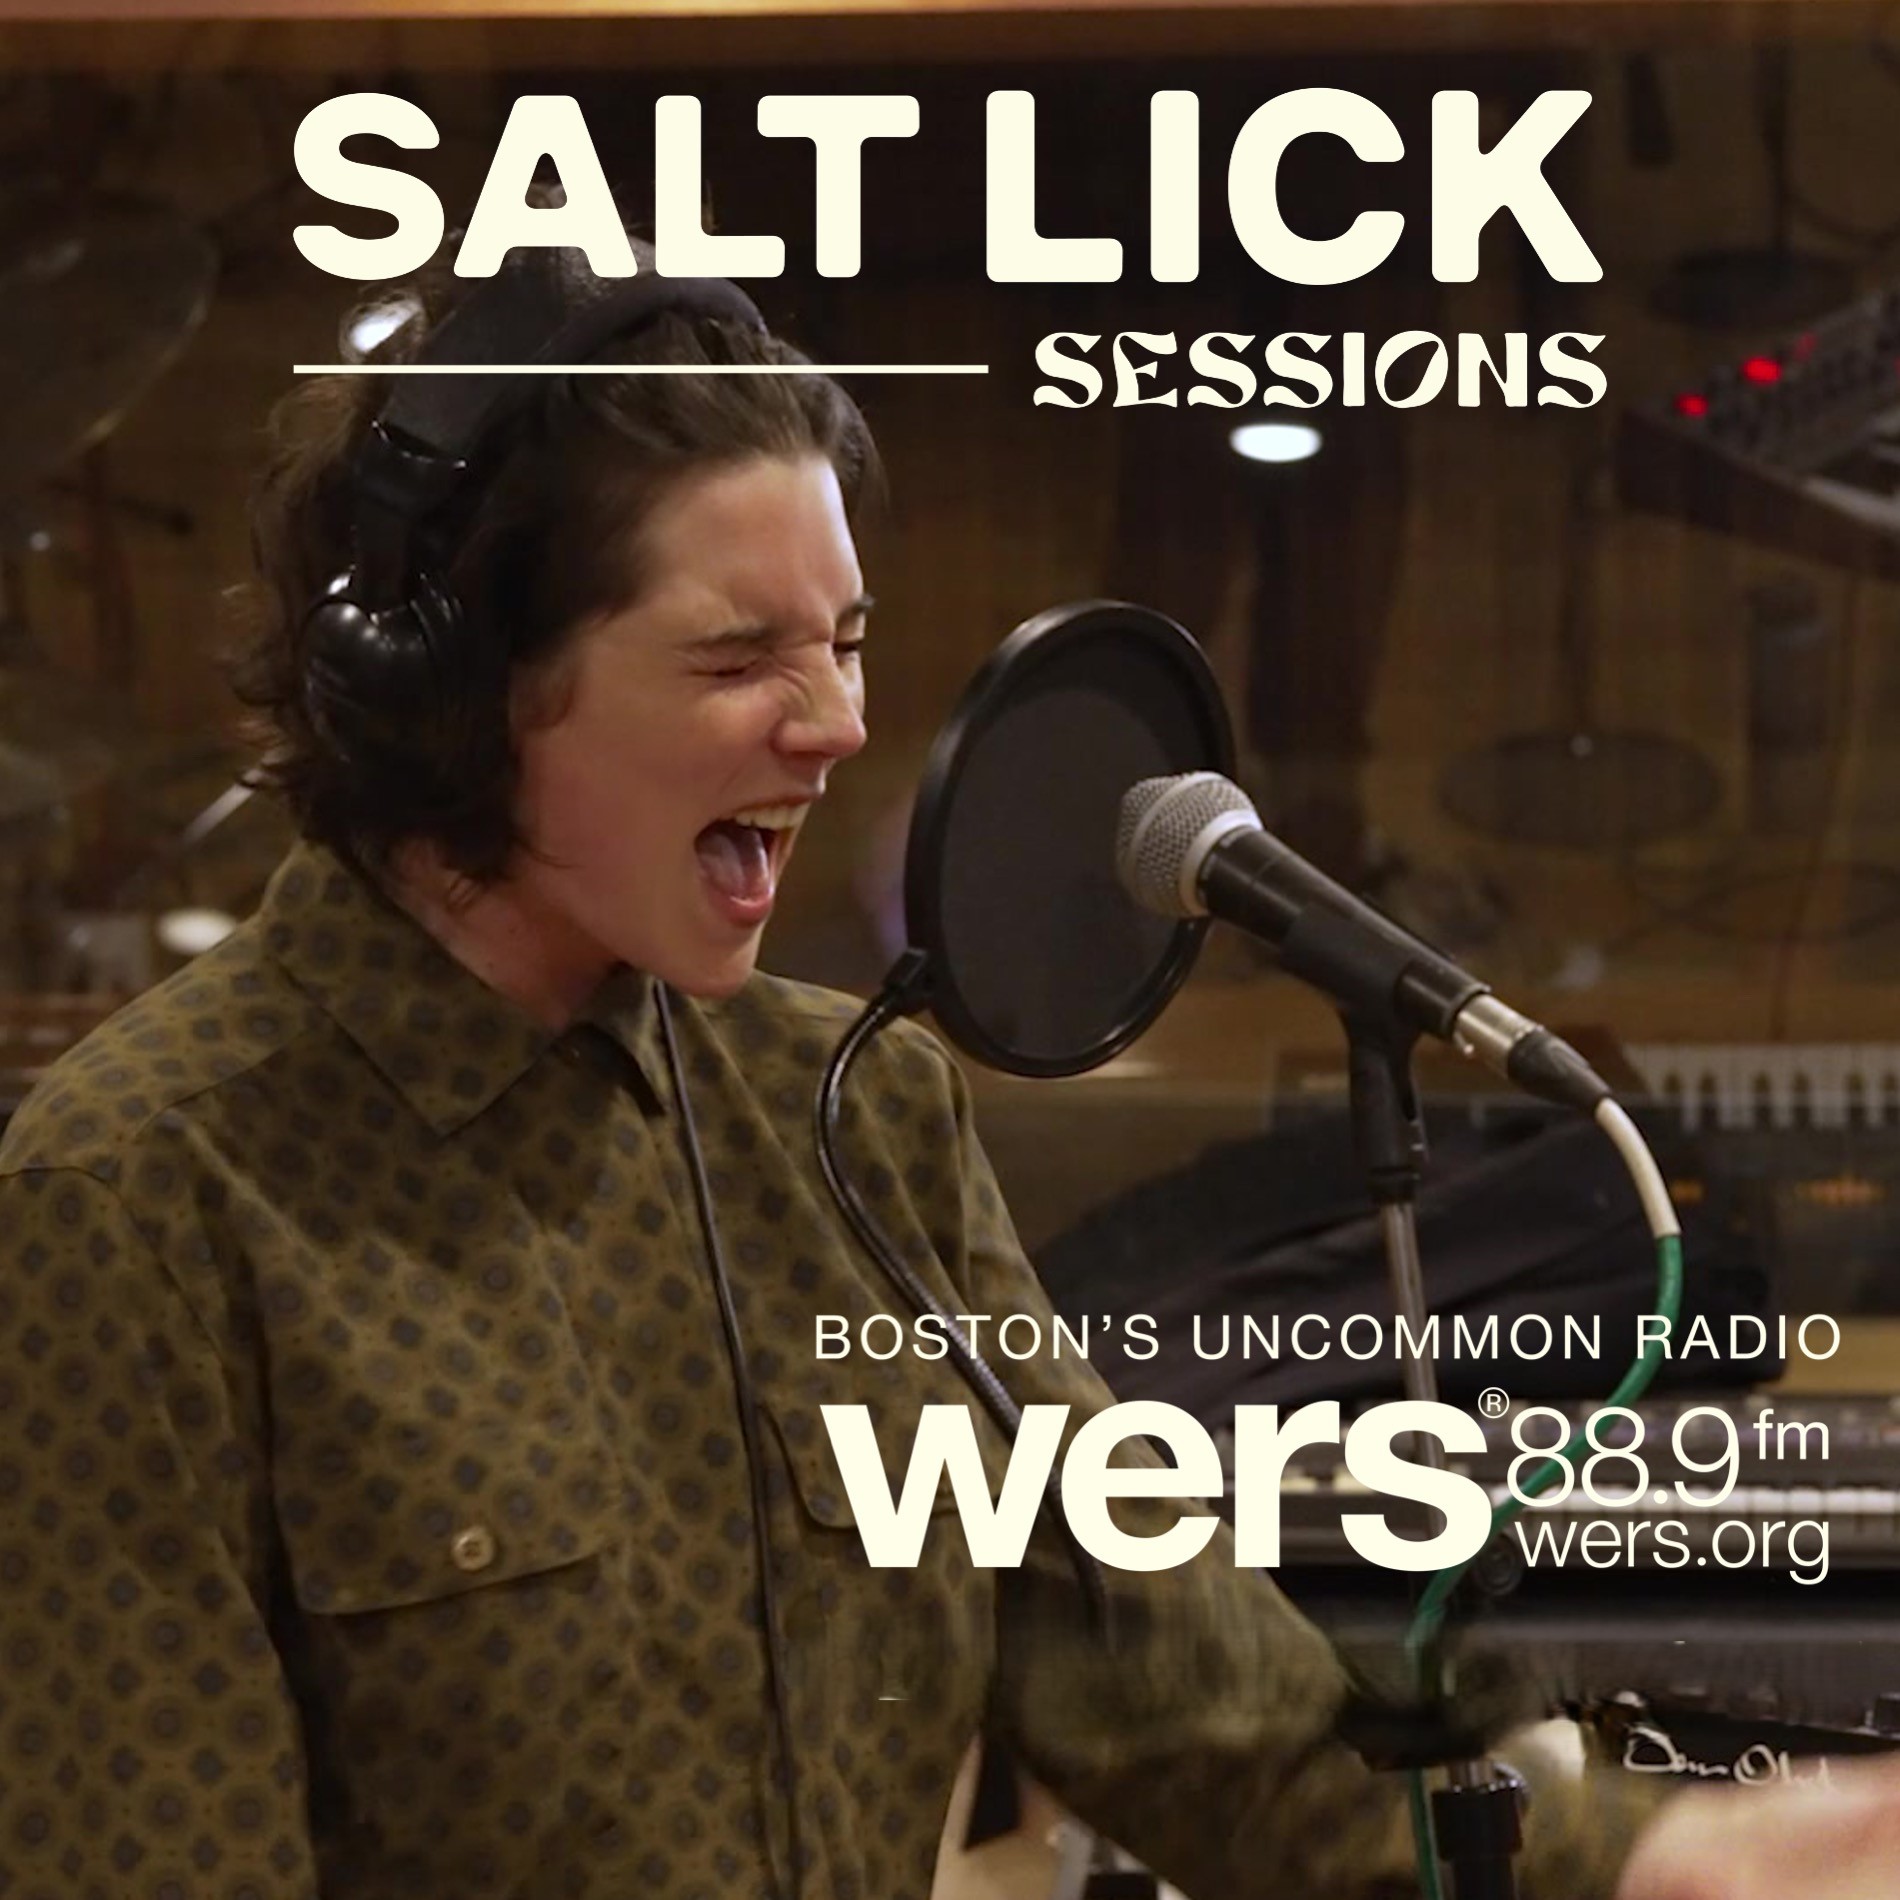 Sammy Rae with headphones singing with mouth wide open and eyes closed in a studio. WERS and Salt Lick Sessions logos laid over the photo